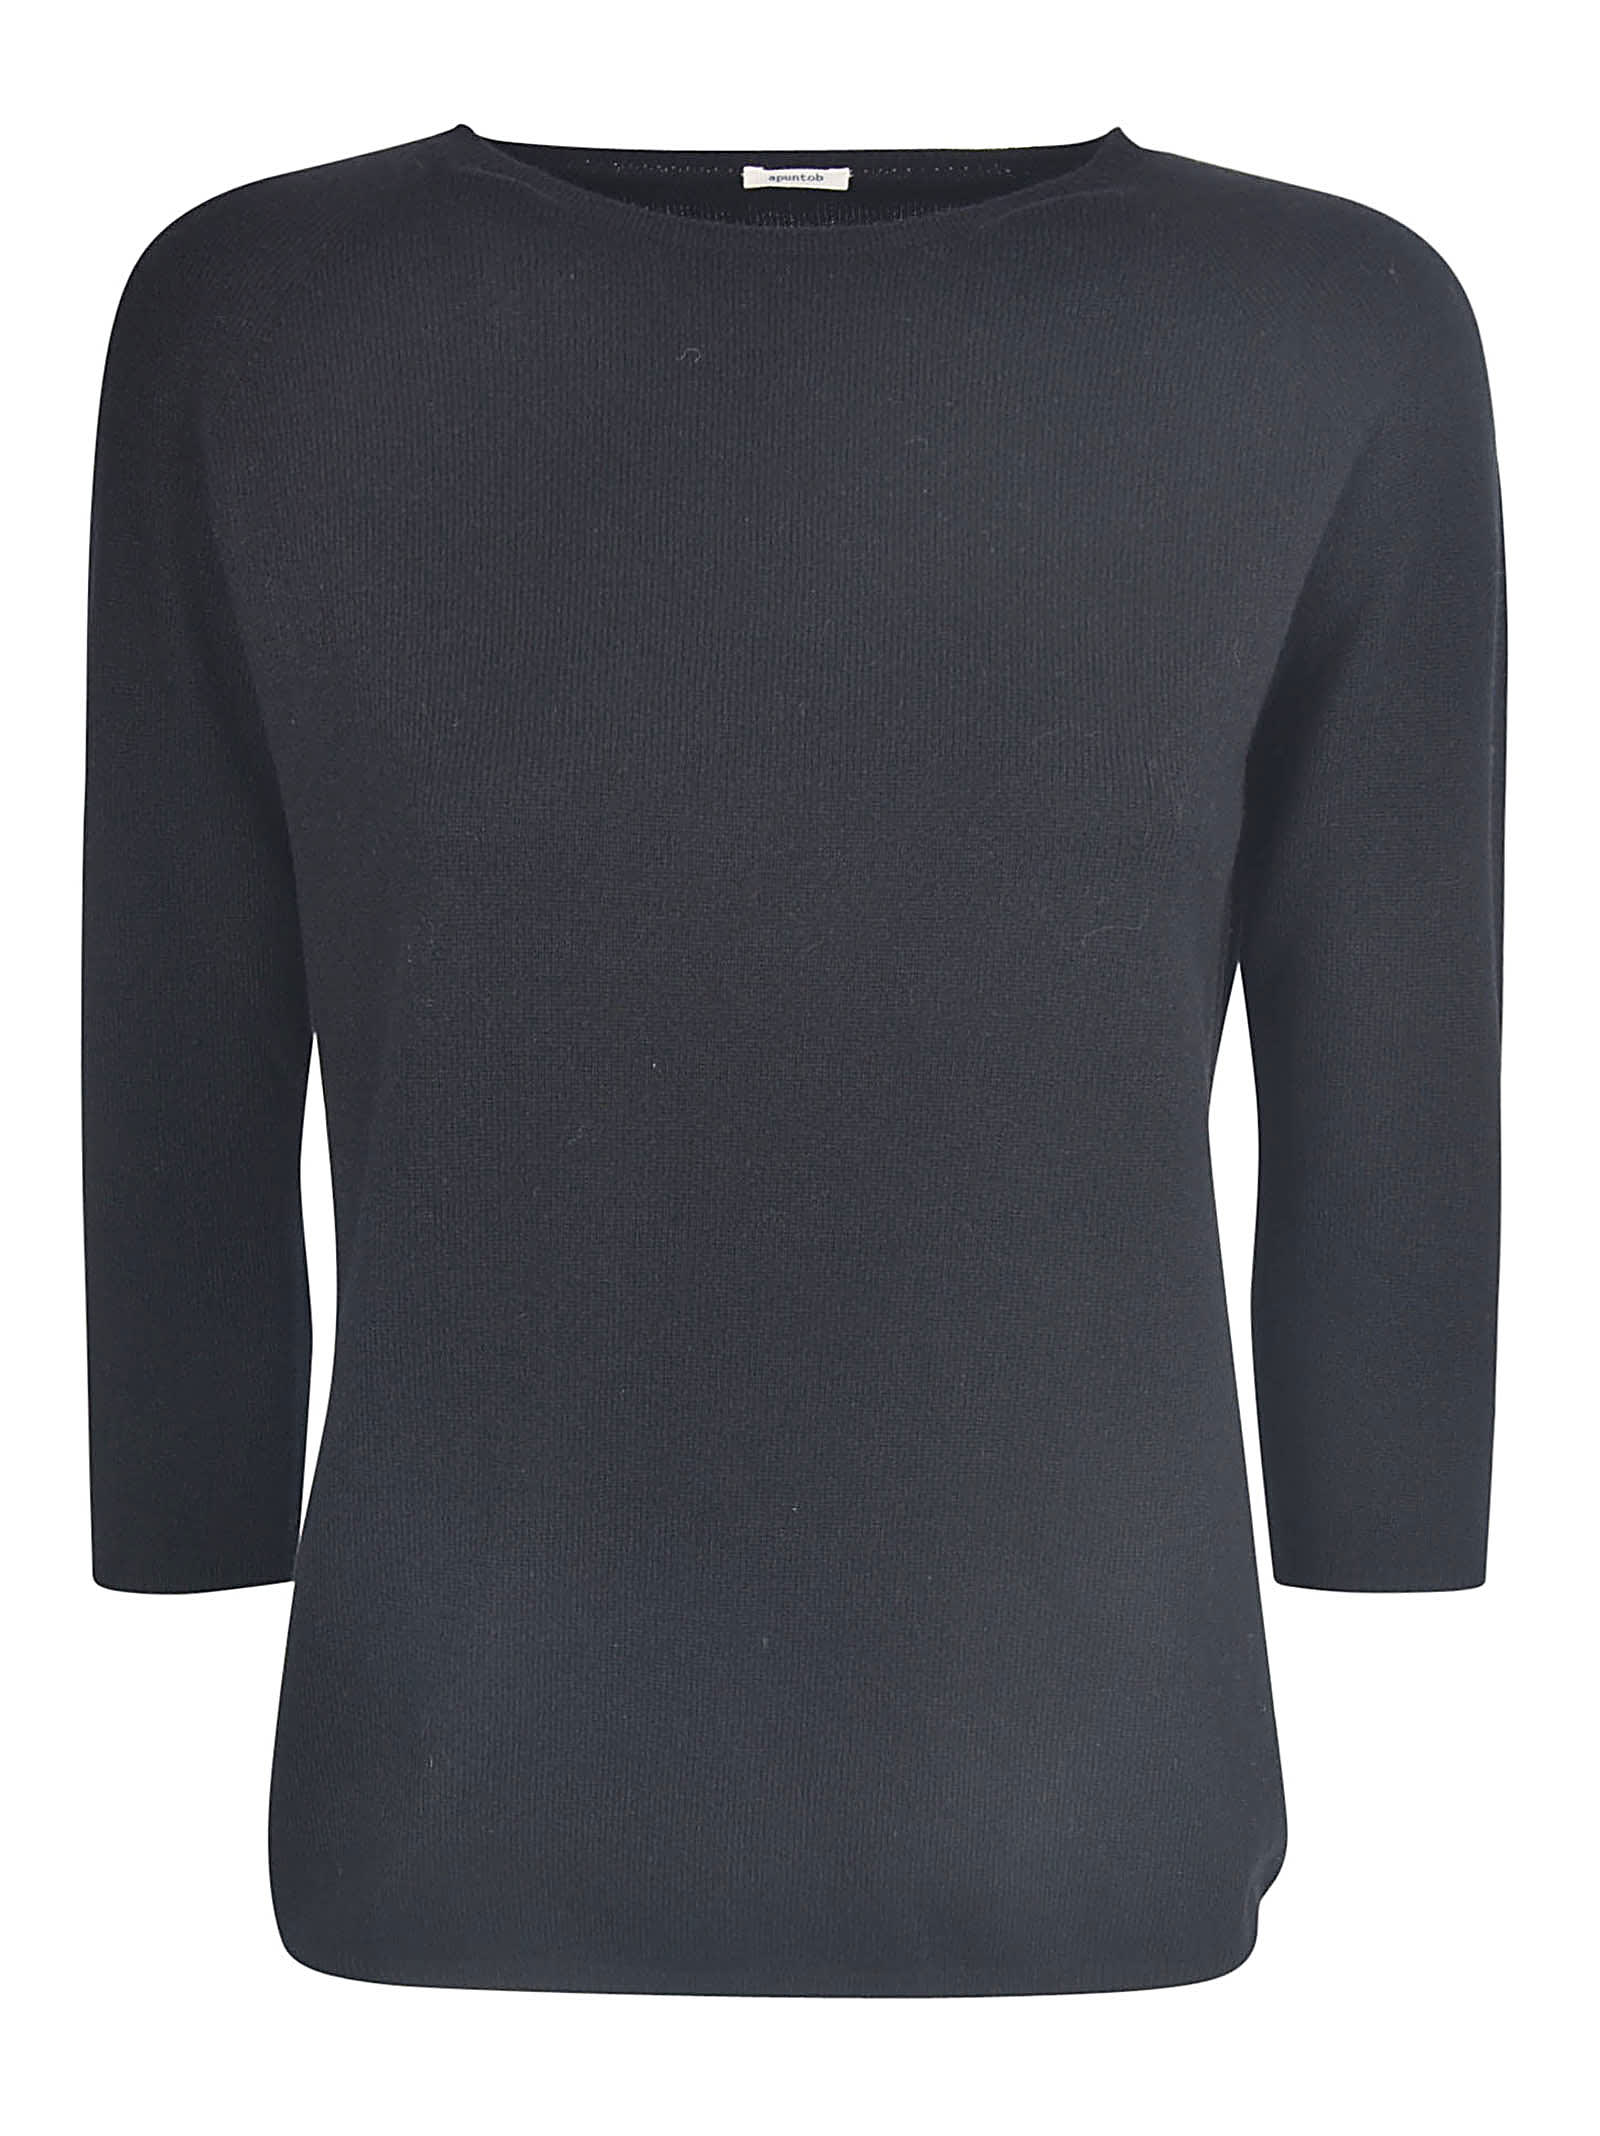 A Punto B Quarter-length Sleeved Sweater In Black